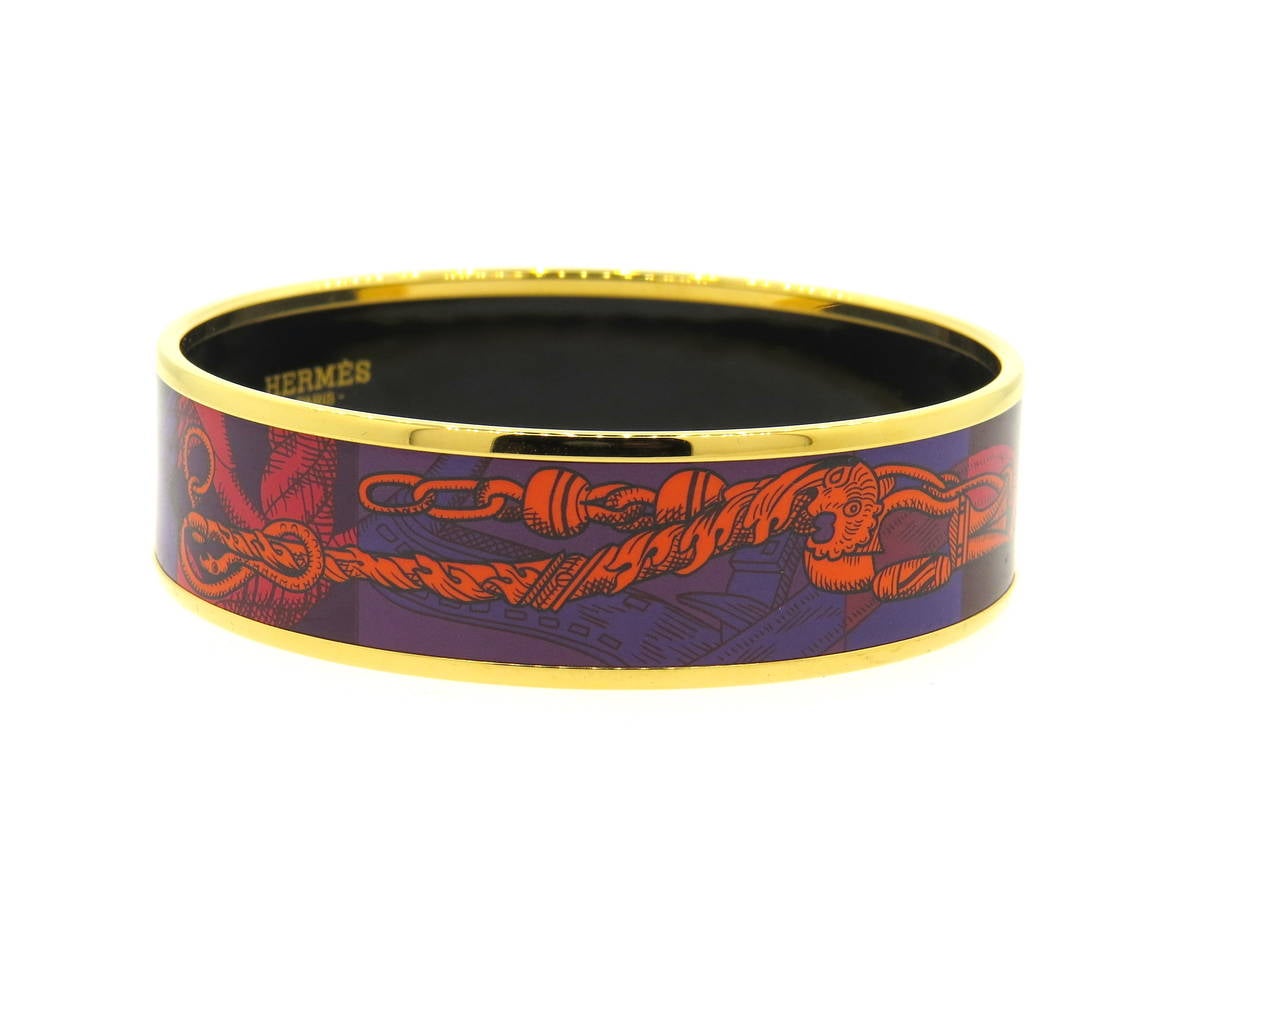 Modern gold tone bangle bracelet, crafted by Hermes, featuring printed enamel ornament. Bracelet's inner diameter is 62mm, bracelet is 18mm wide. Marked Hermes Paris, made in France + R. Weight of the piece - 35.8 grams
Comes with Hermes pouch and